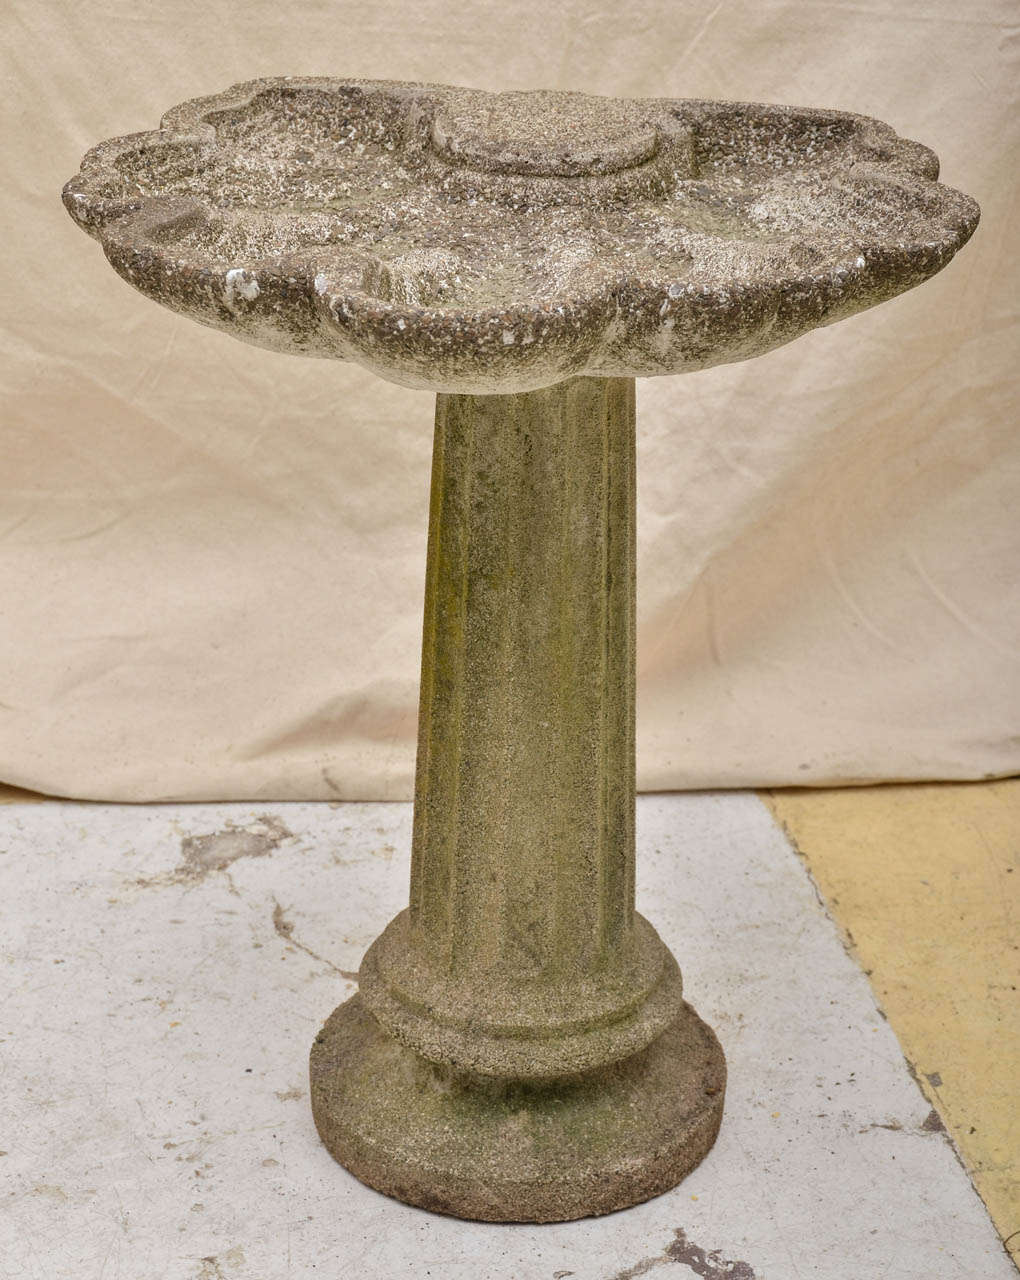 Very Decorative American 1940's Scallop Shell Cement Bird Bath On A Tapering Fluted Column. Beautiful Old Weathered Patina.